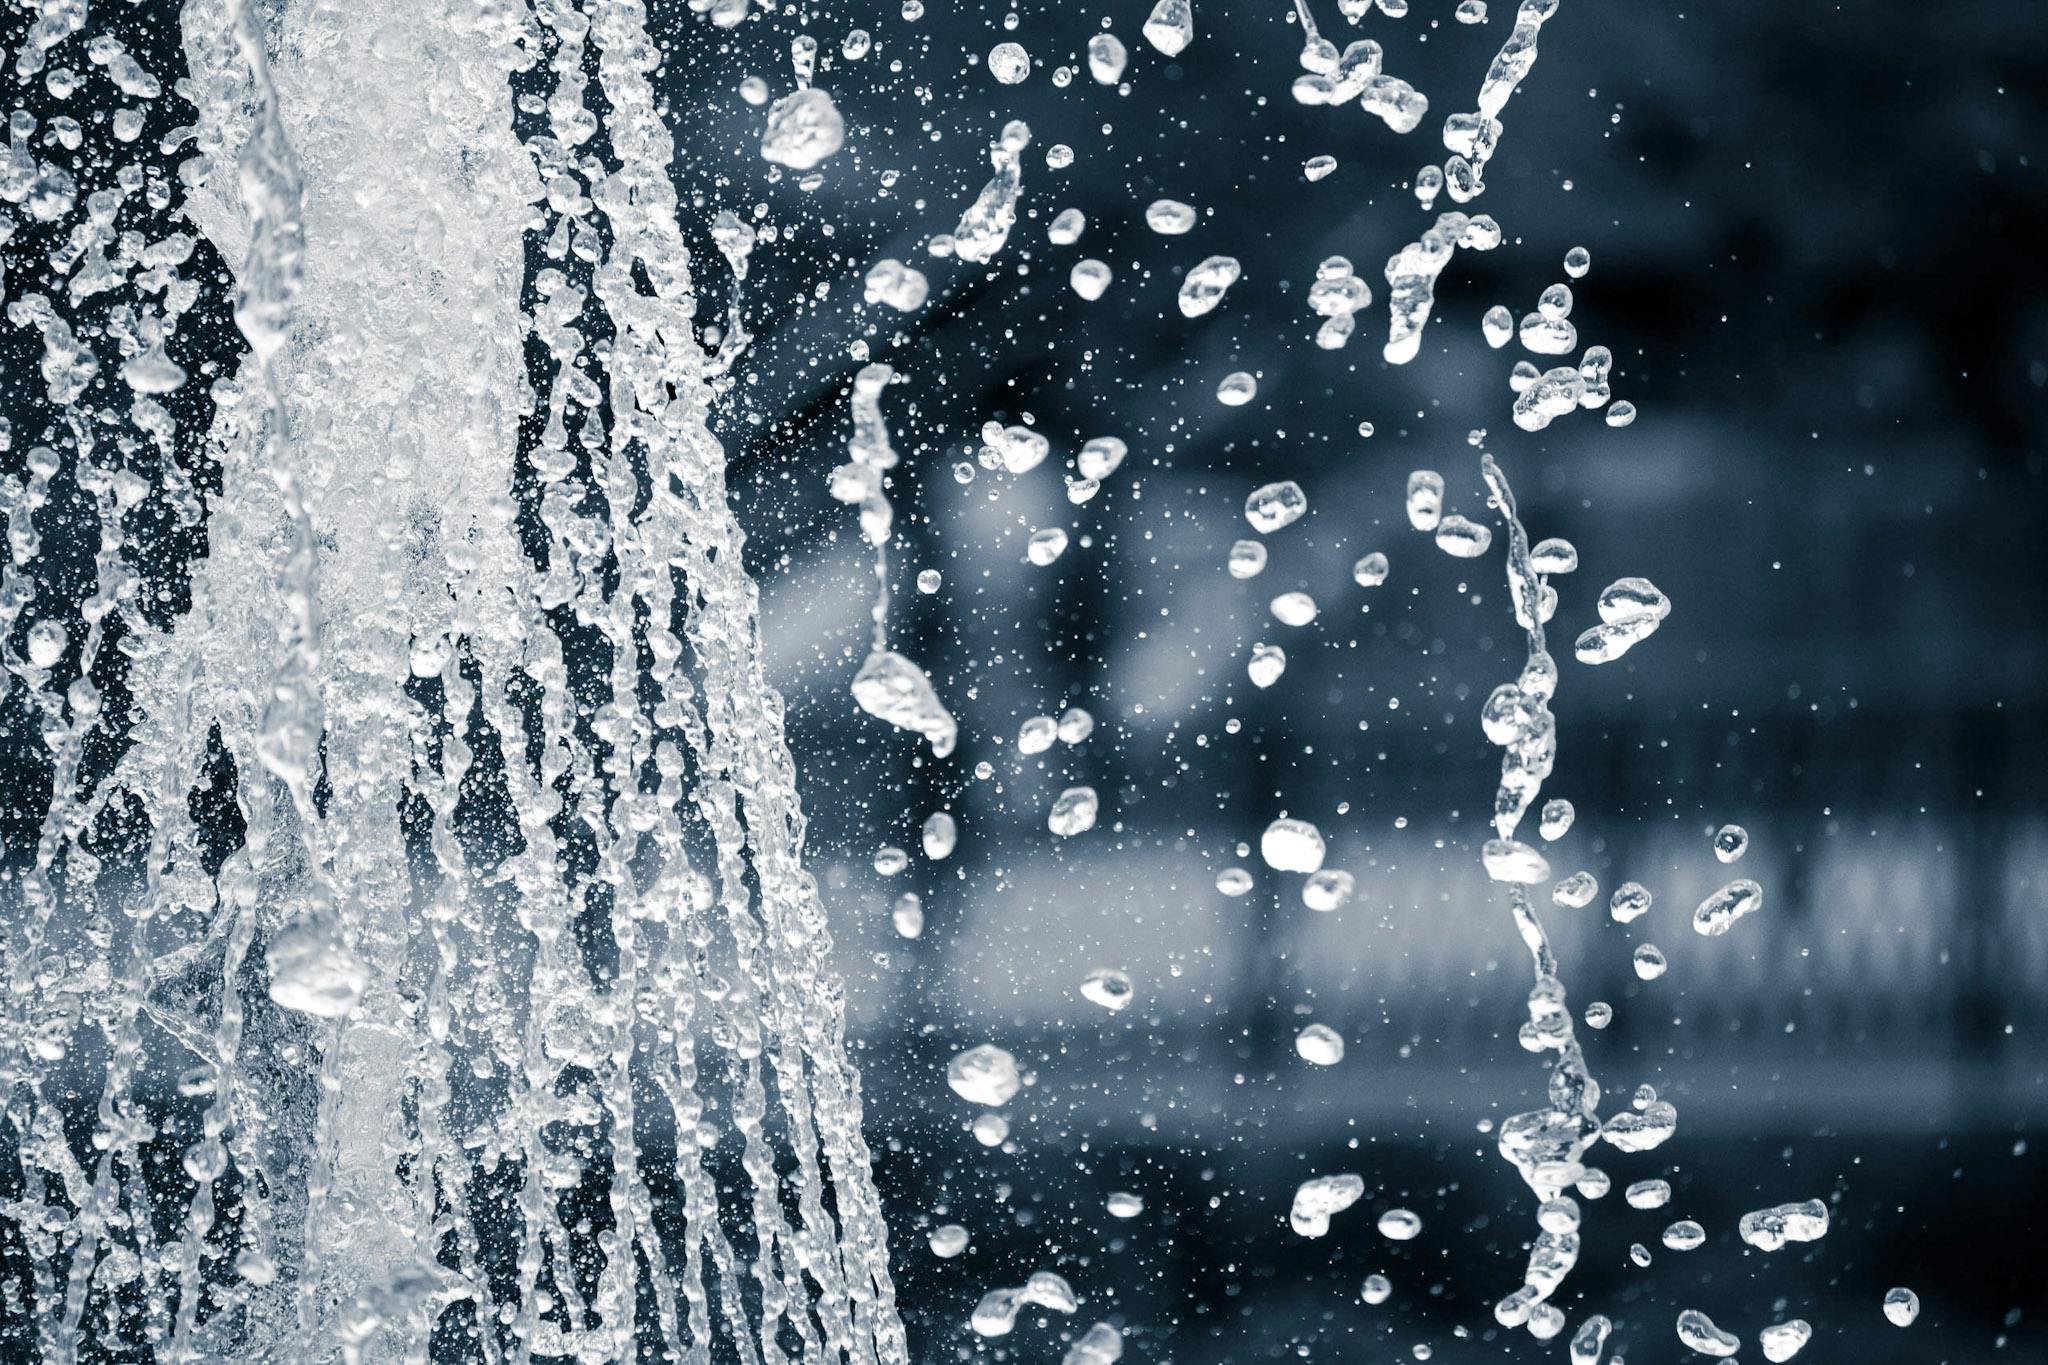 a black and white photo of a water fountain, an album cover, unsplash, lots of bubbles, icicle, detailed screenshot, showers